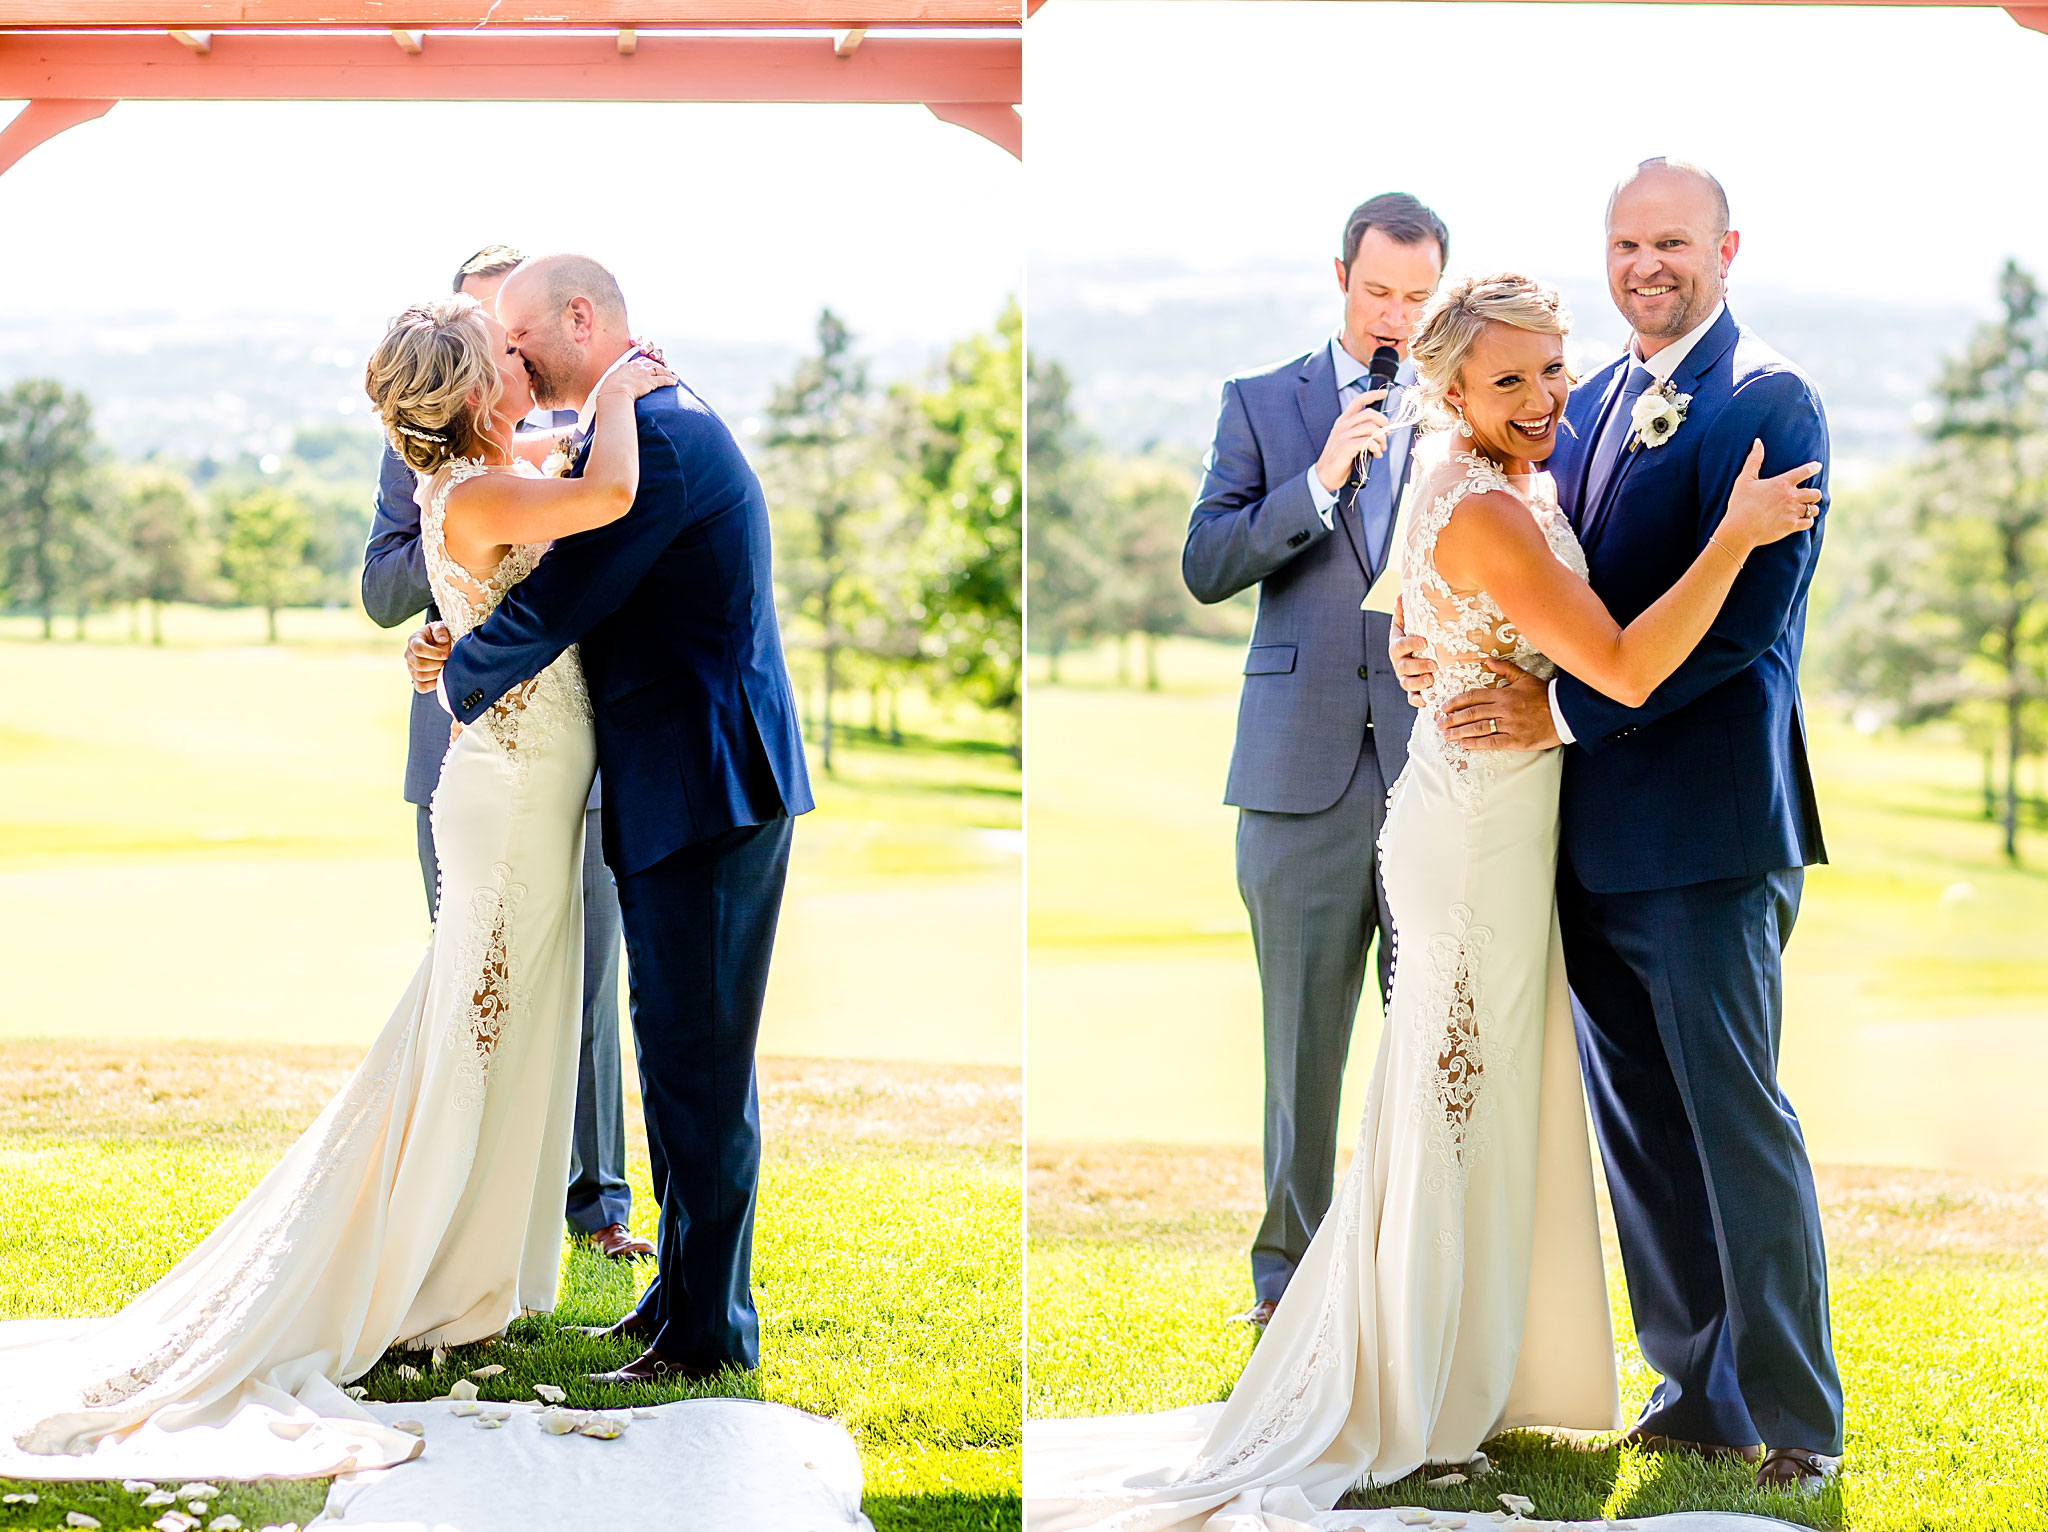 First Kiss between Bride and Groom. Kelli & Jason's golf course wedding at The Ranch Country Club by Colorado Wedding Photographer Jennifer Garza, Small wedding ideas, Intimate wedding, Golf Course Wedding, Country Club Wedding, Summer Wedding, Golf Wedding, Wedding planning, Colorado Wedding Photographer, Colorado Elopement Photographer, Colorado Elopement, Colorado Wedding, Denver Wedding Photographer, Denver Wedding, Wedding Inspiration, Summer Wedding Inspiration, Covid Wedding